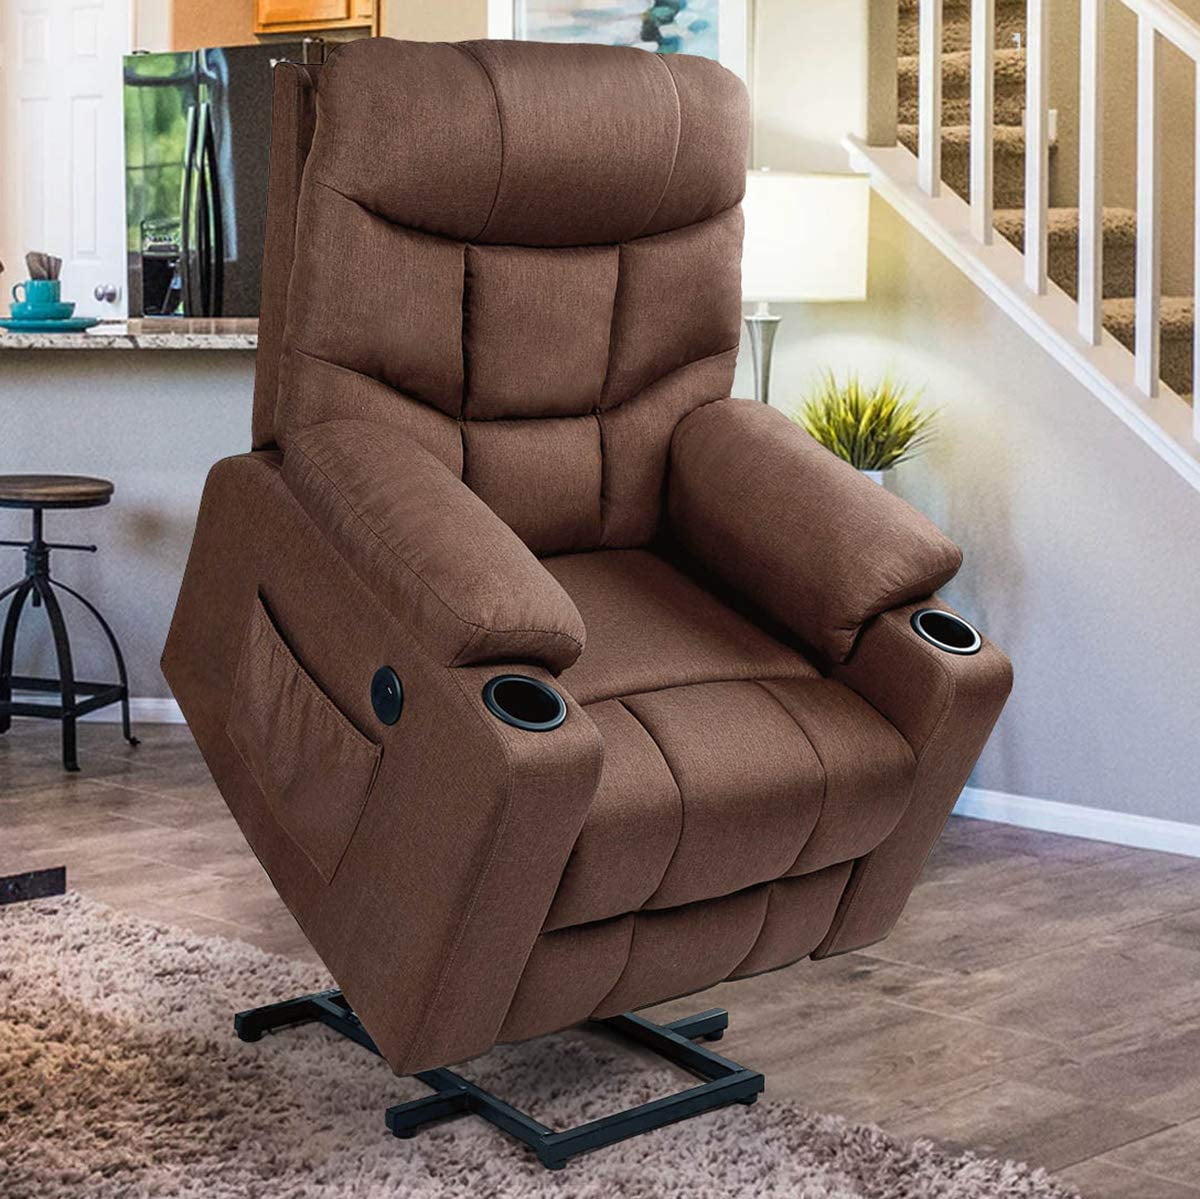 Erommy Power Lift Chair Electric Recliner for Elderly Heated Vibration